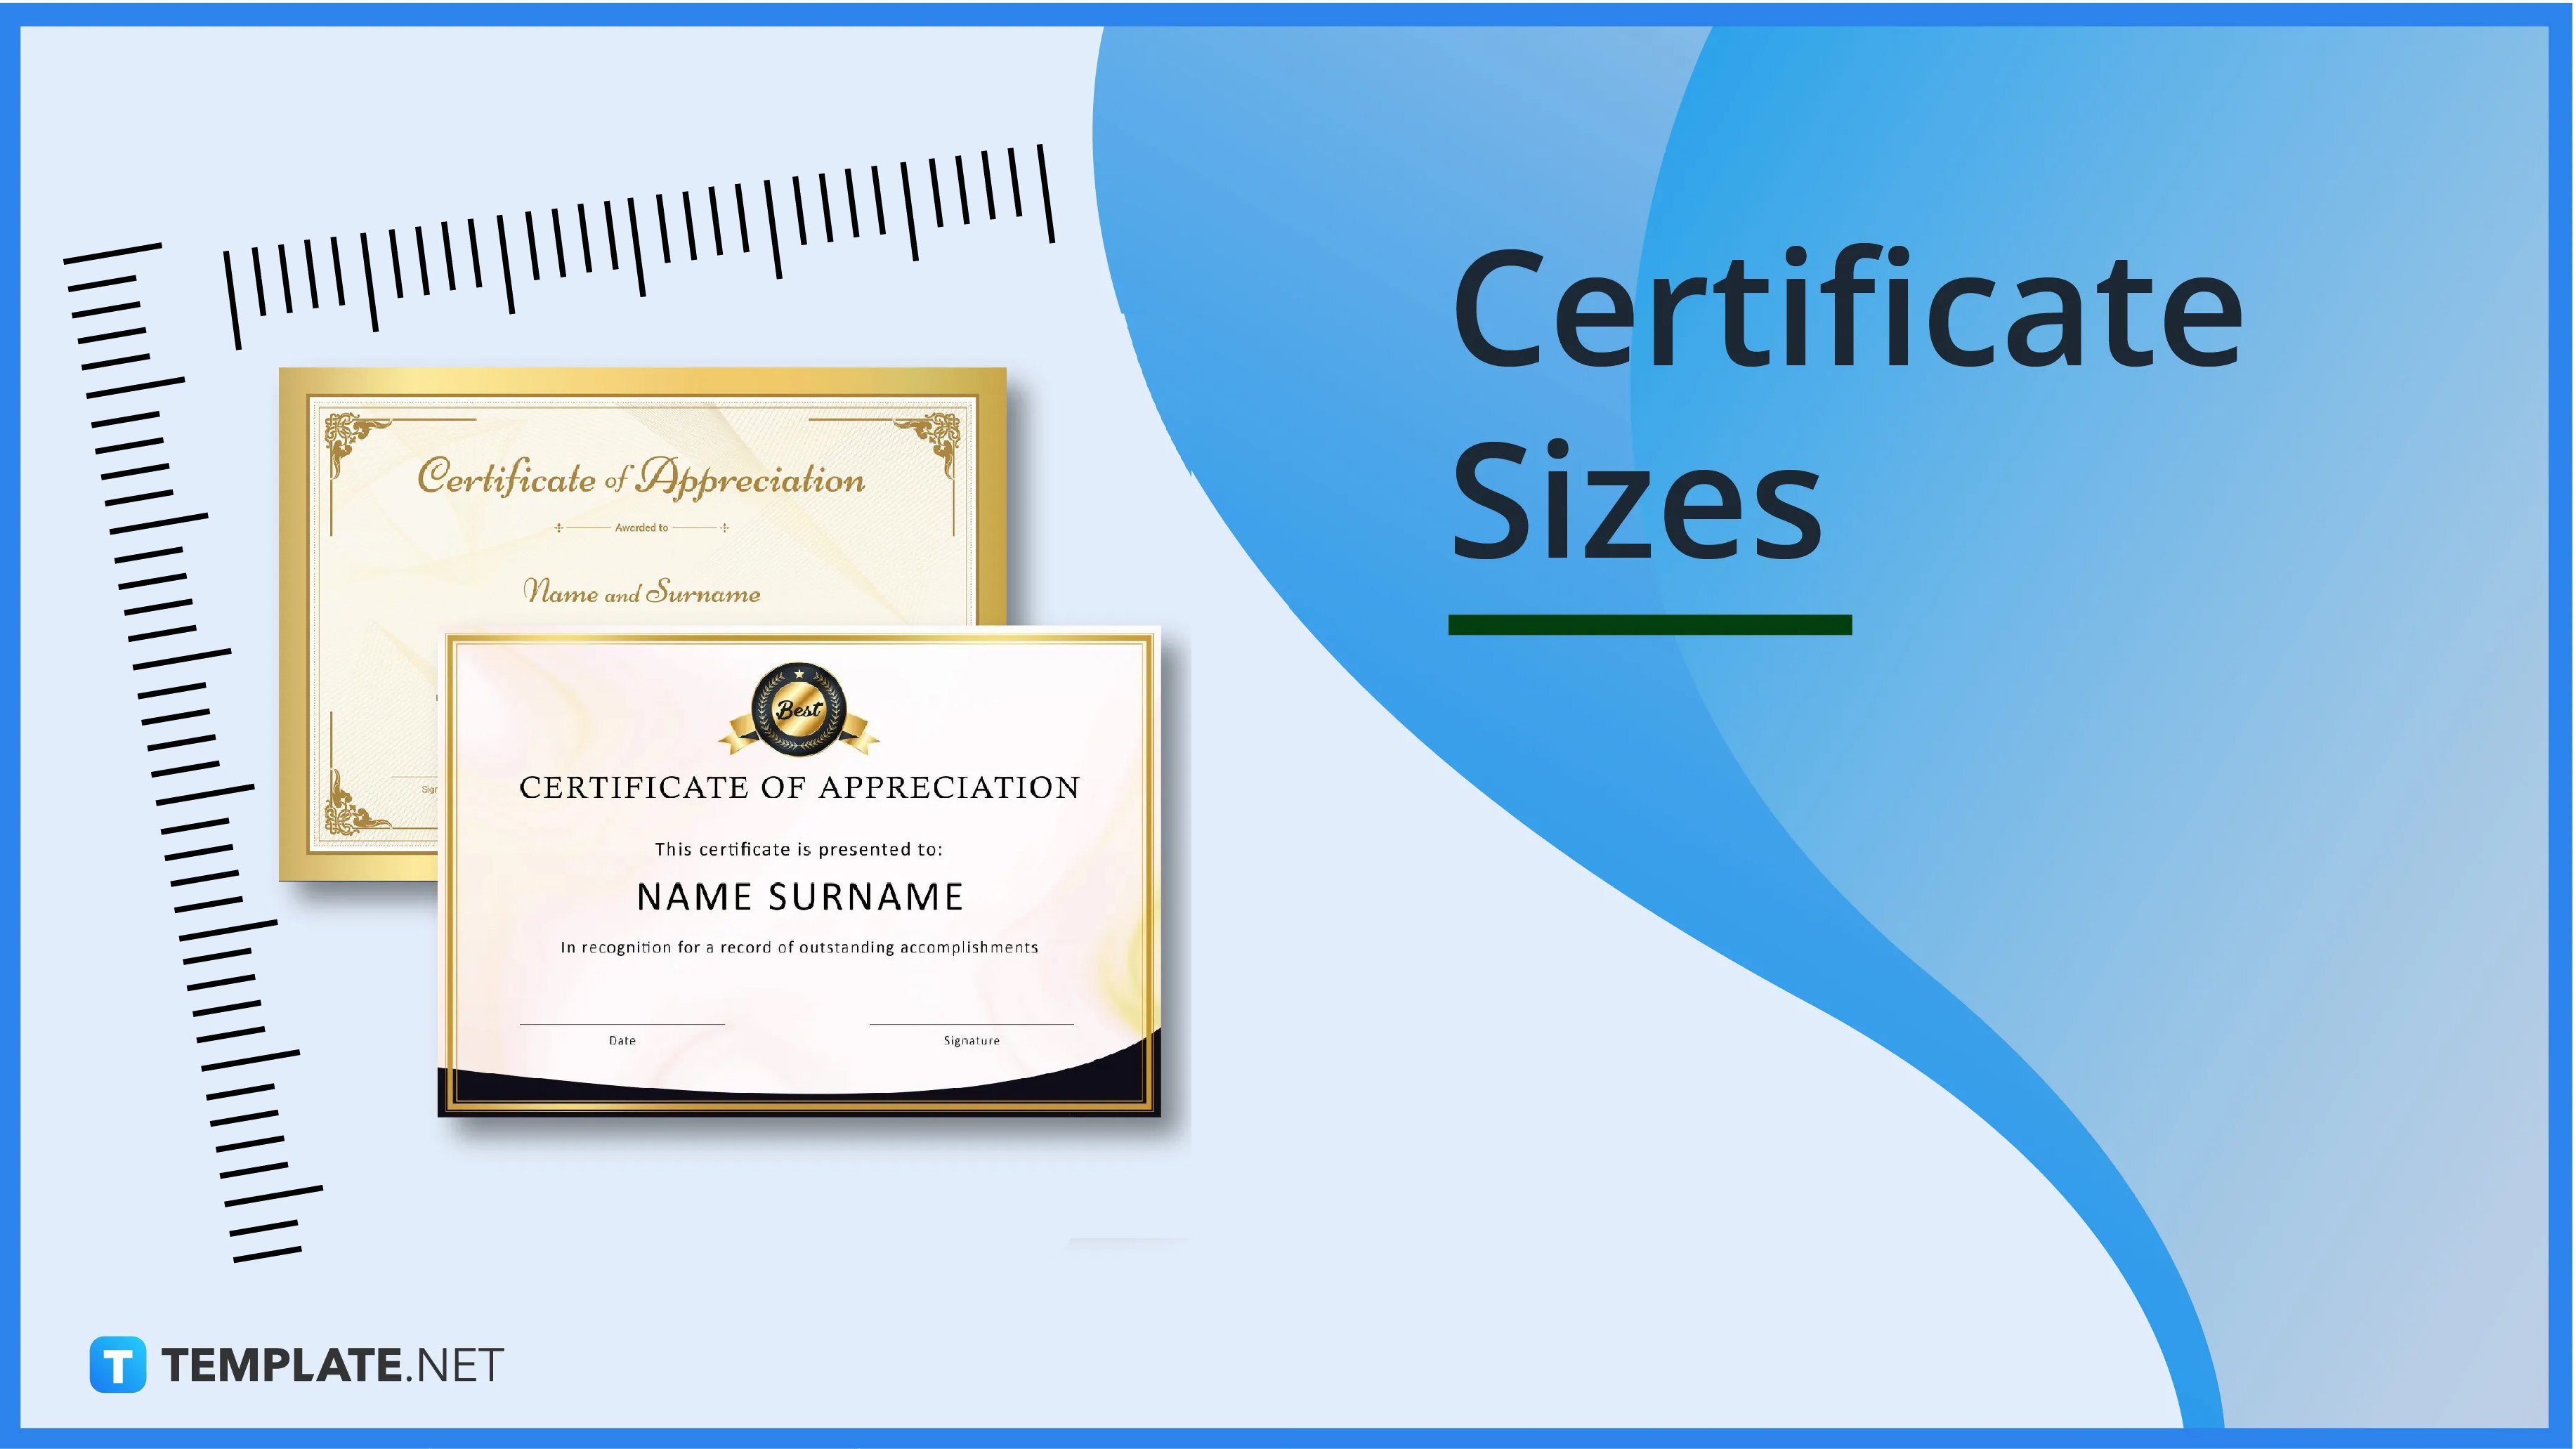 Certificate Size Dimension Inches mm cms Pixel